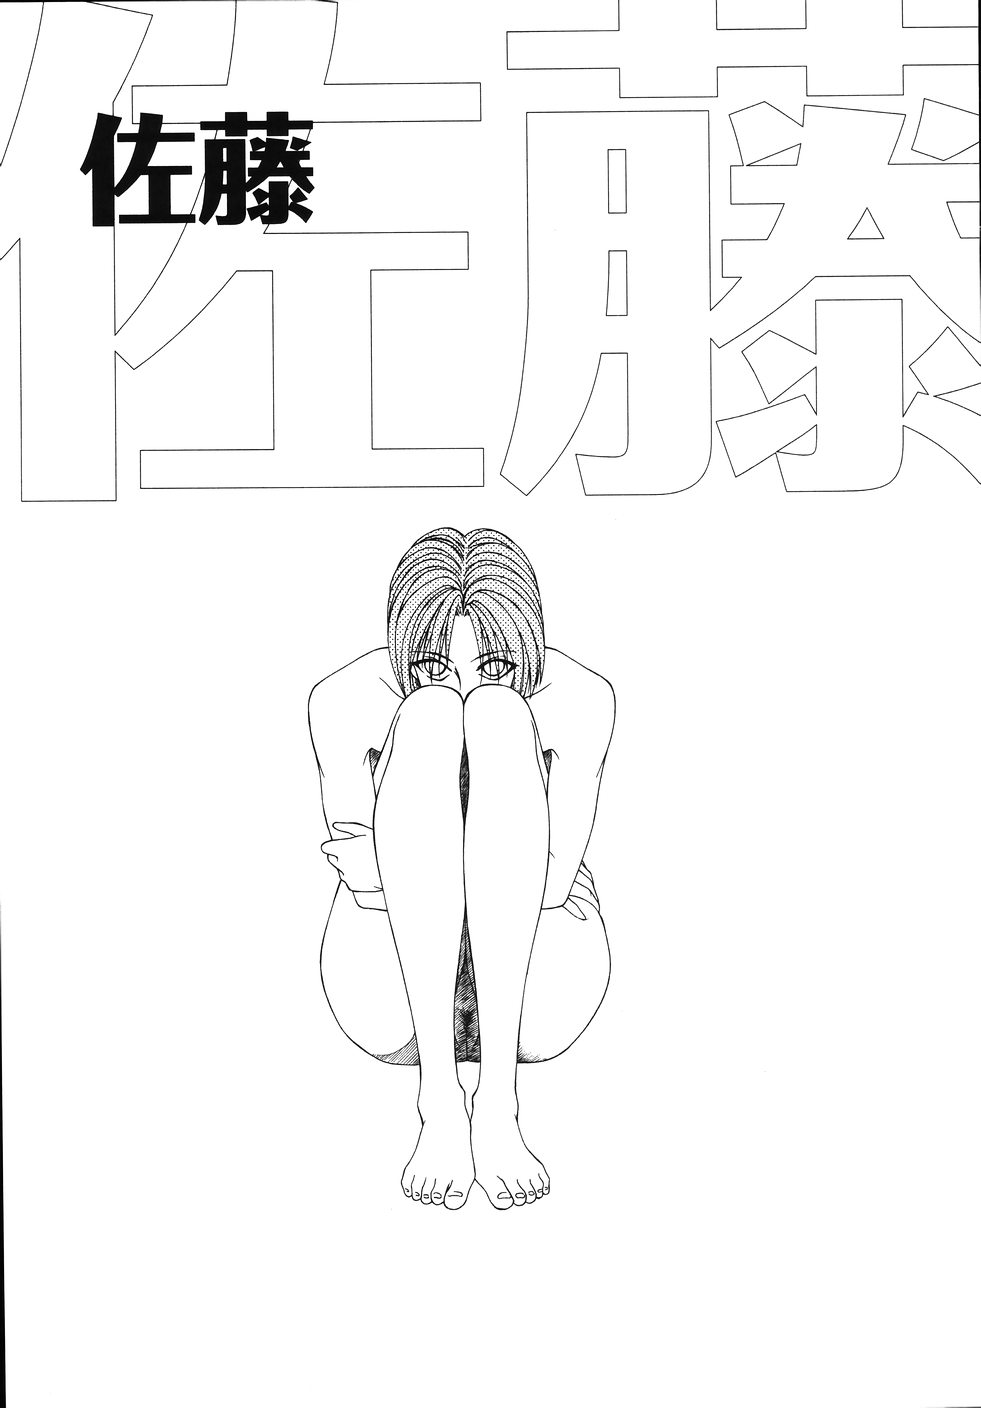 [Ikoma Ippei] The raped girl and the XXX man [伊駒一平] 犯され少女と○○者